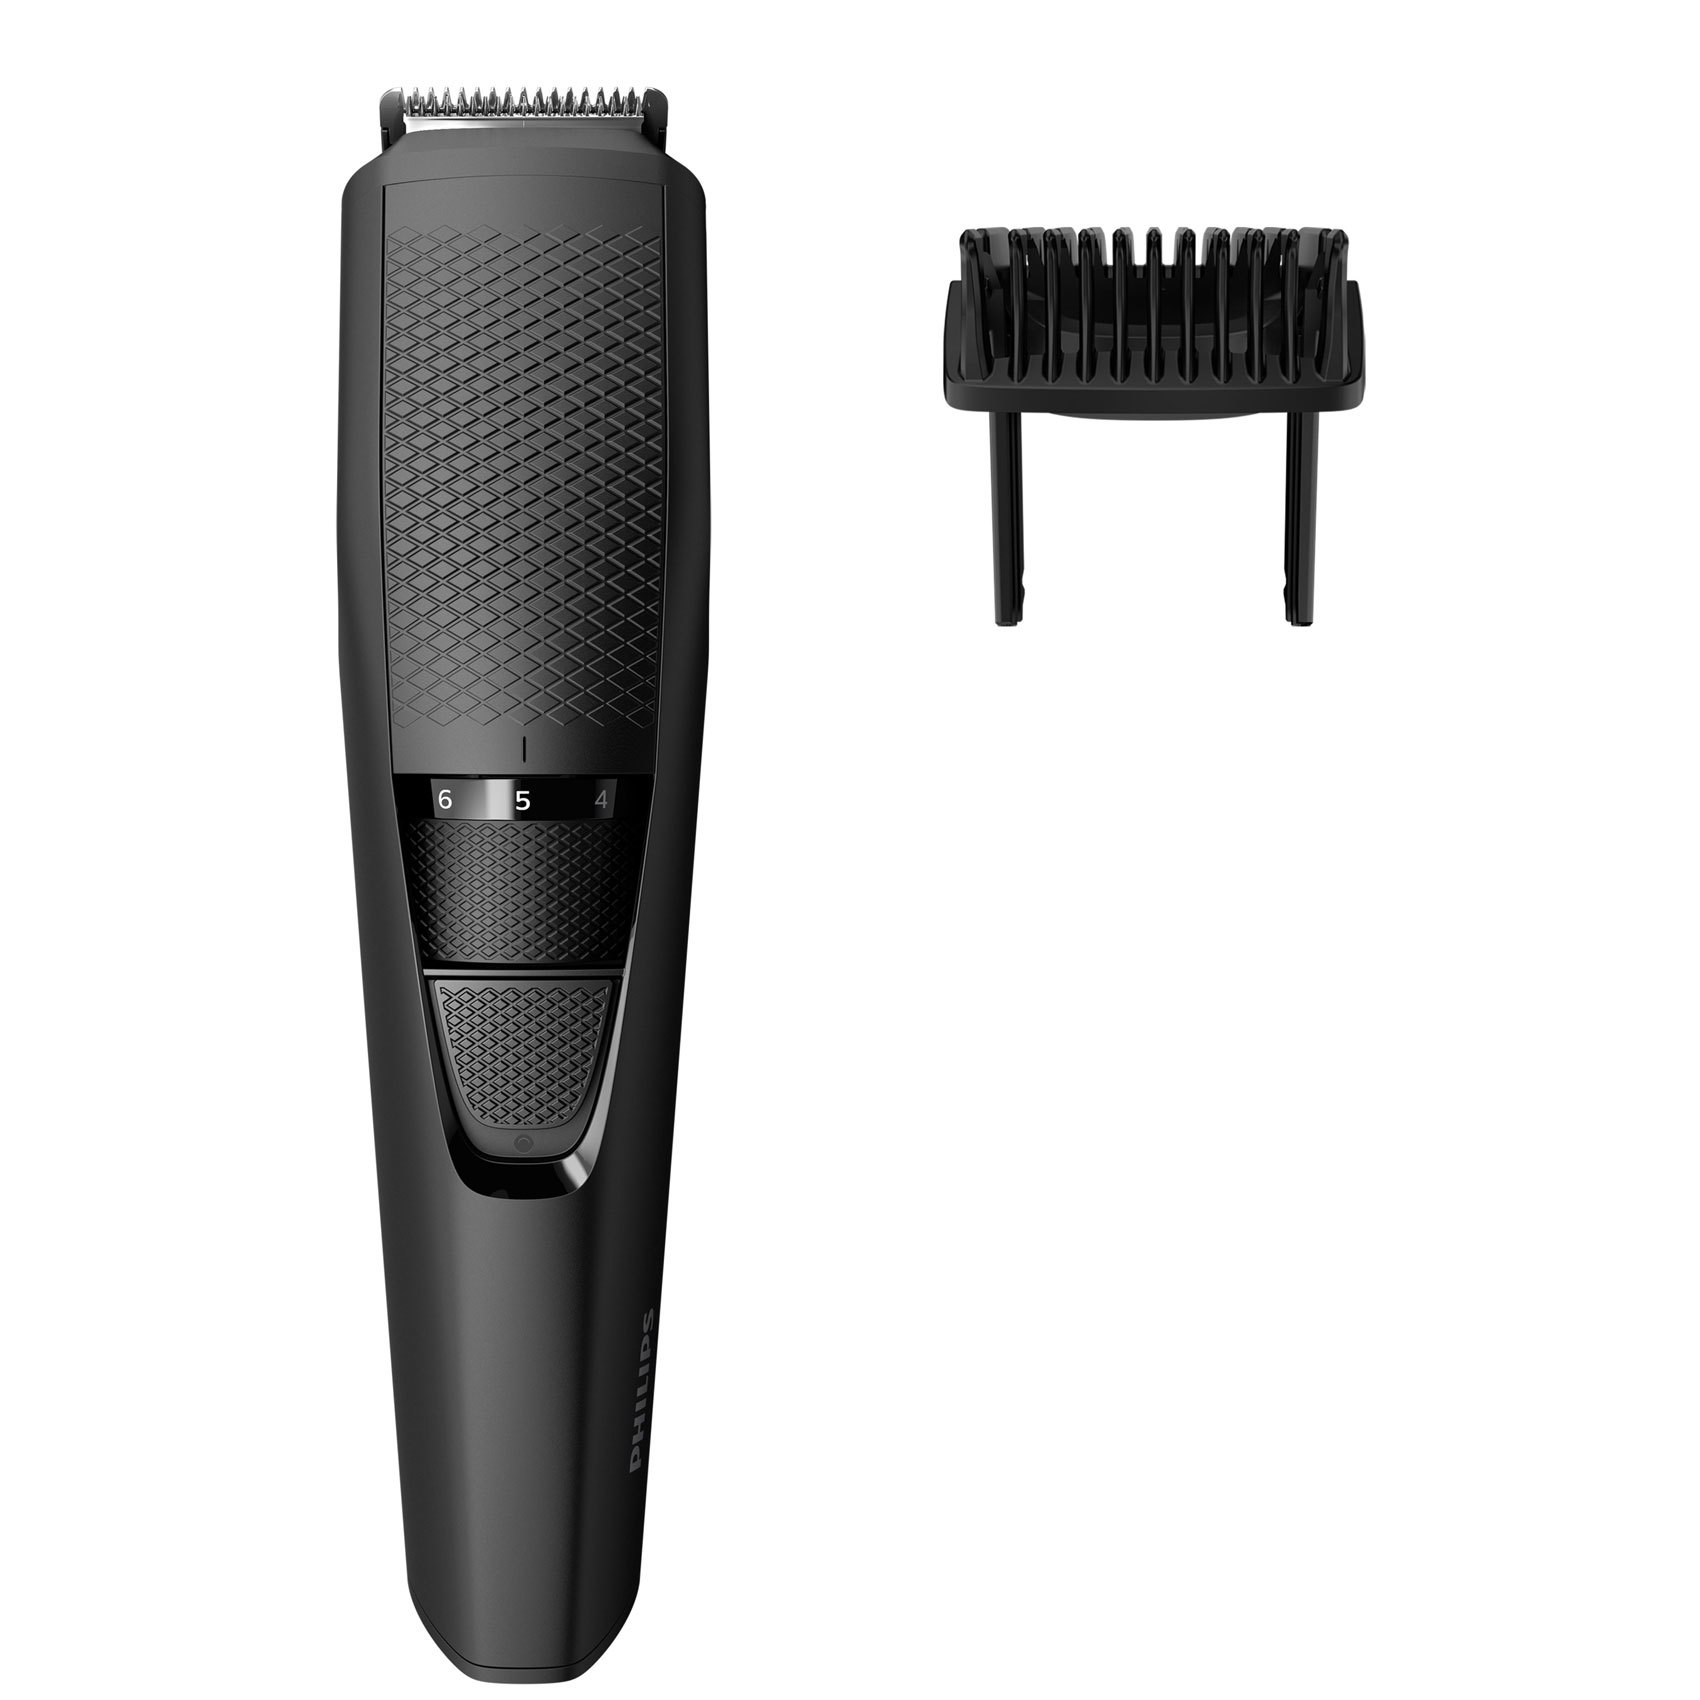 philips series 3000 3 day beard trimmer